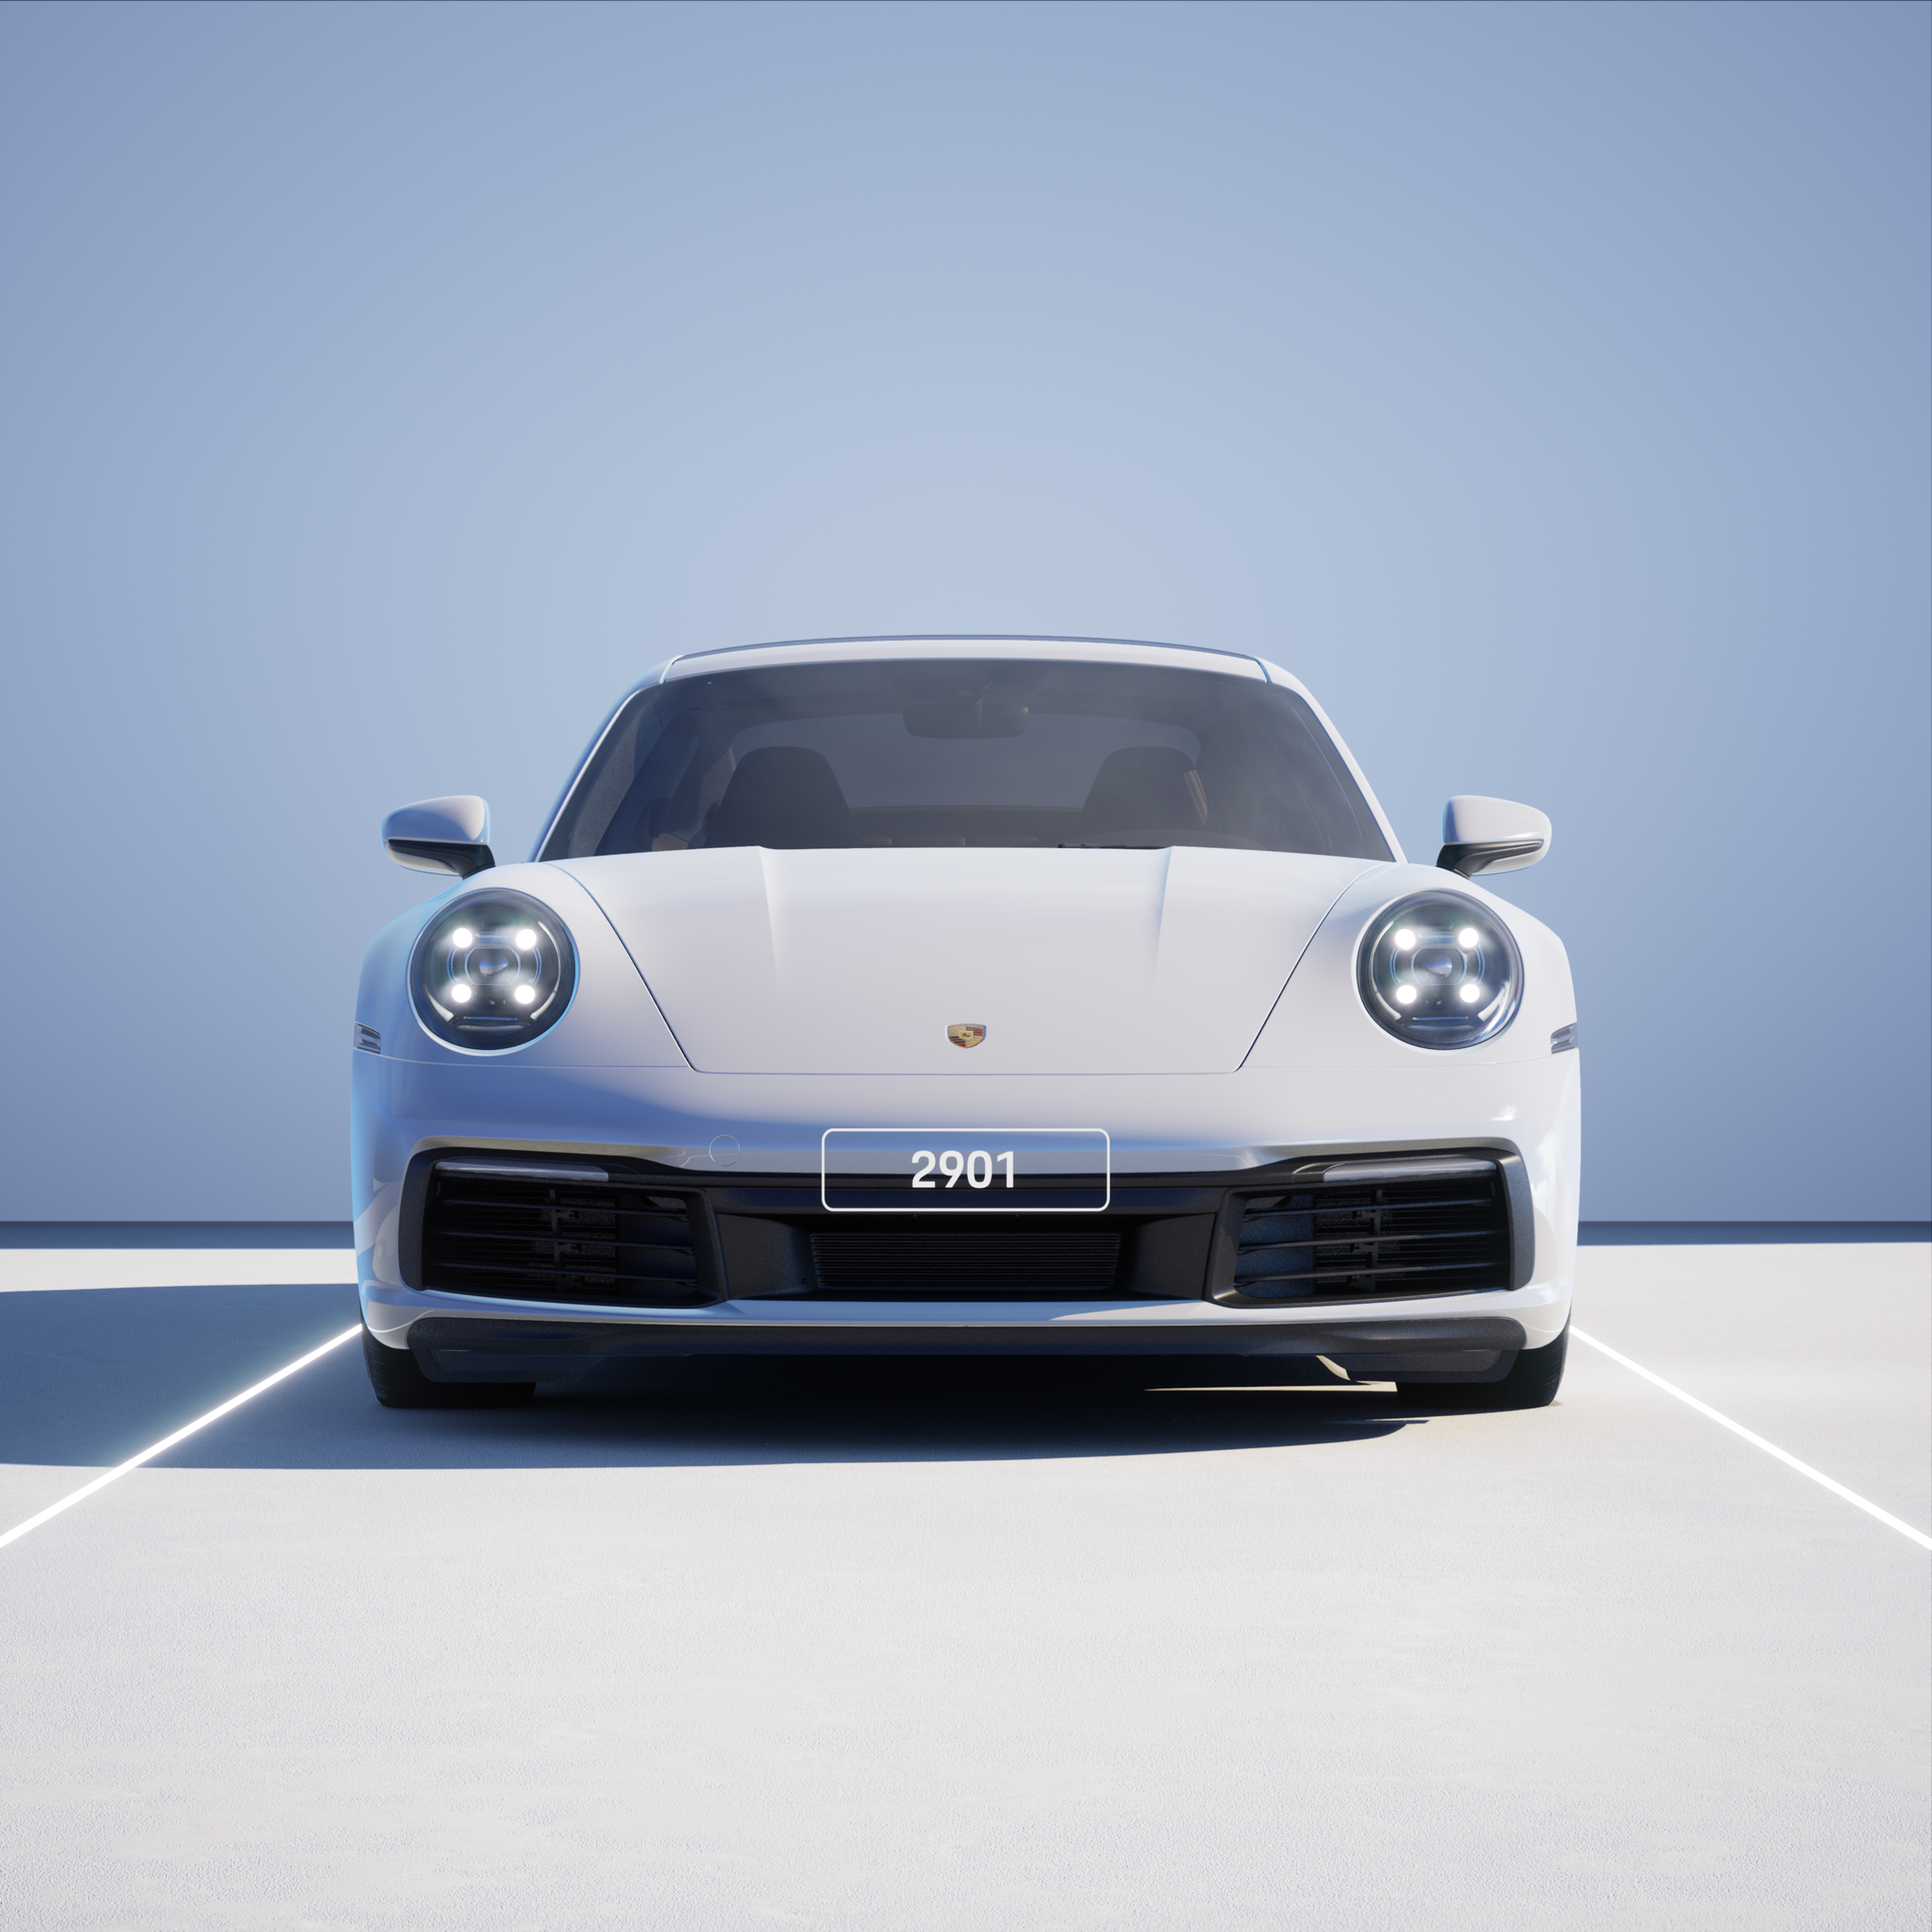 The PORSCHΞ 911 2901 image in phase